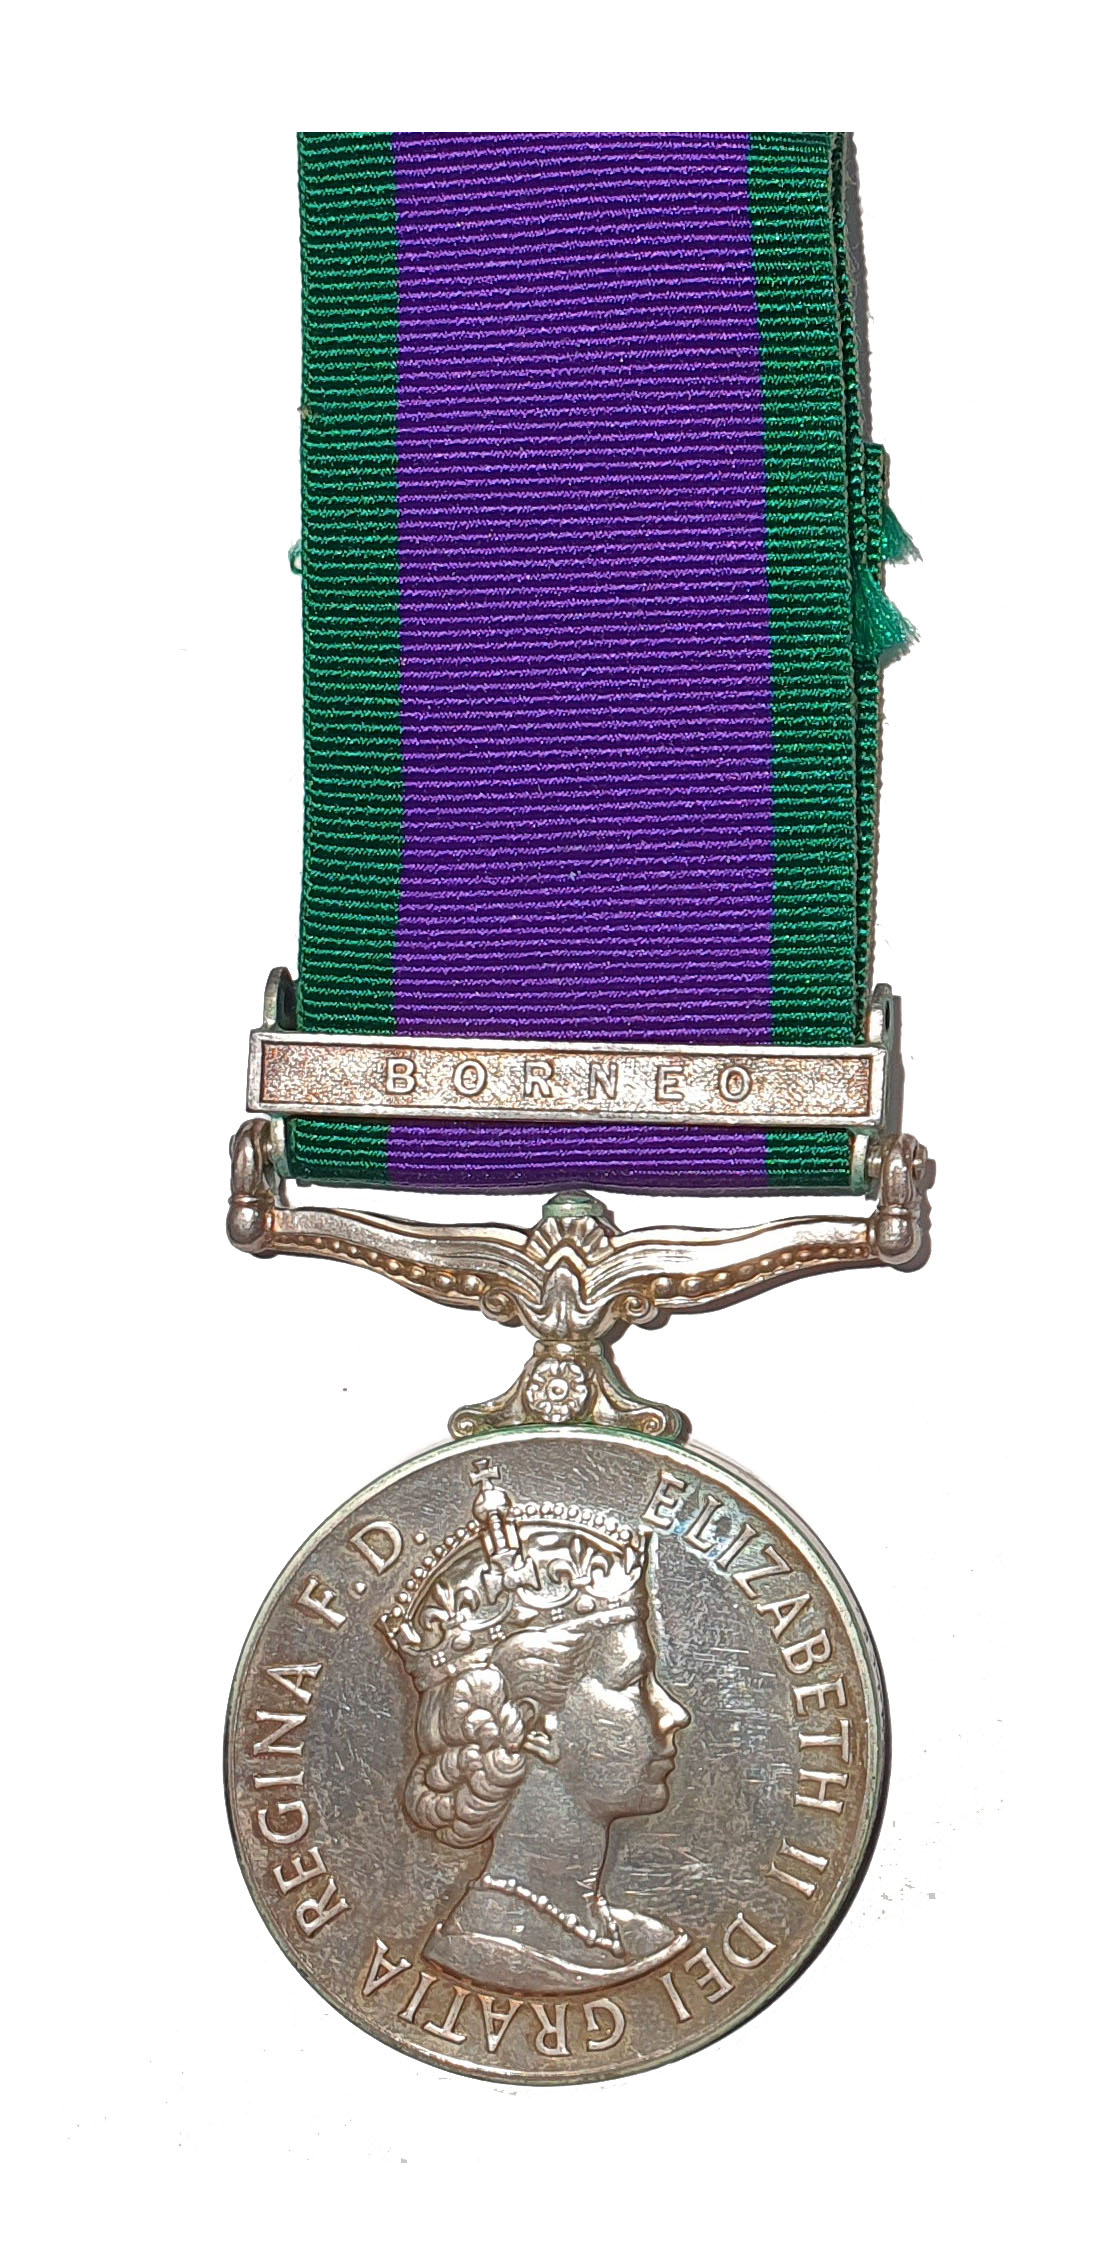 General Service Medal 1962-2007, one clasp, Borneo awarded to F.F. Reserve Liman Ak Elong